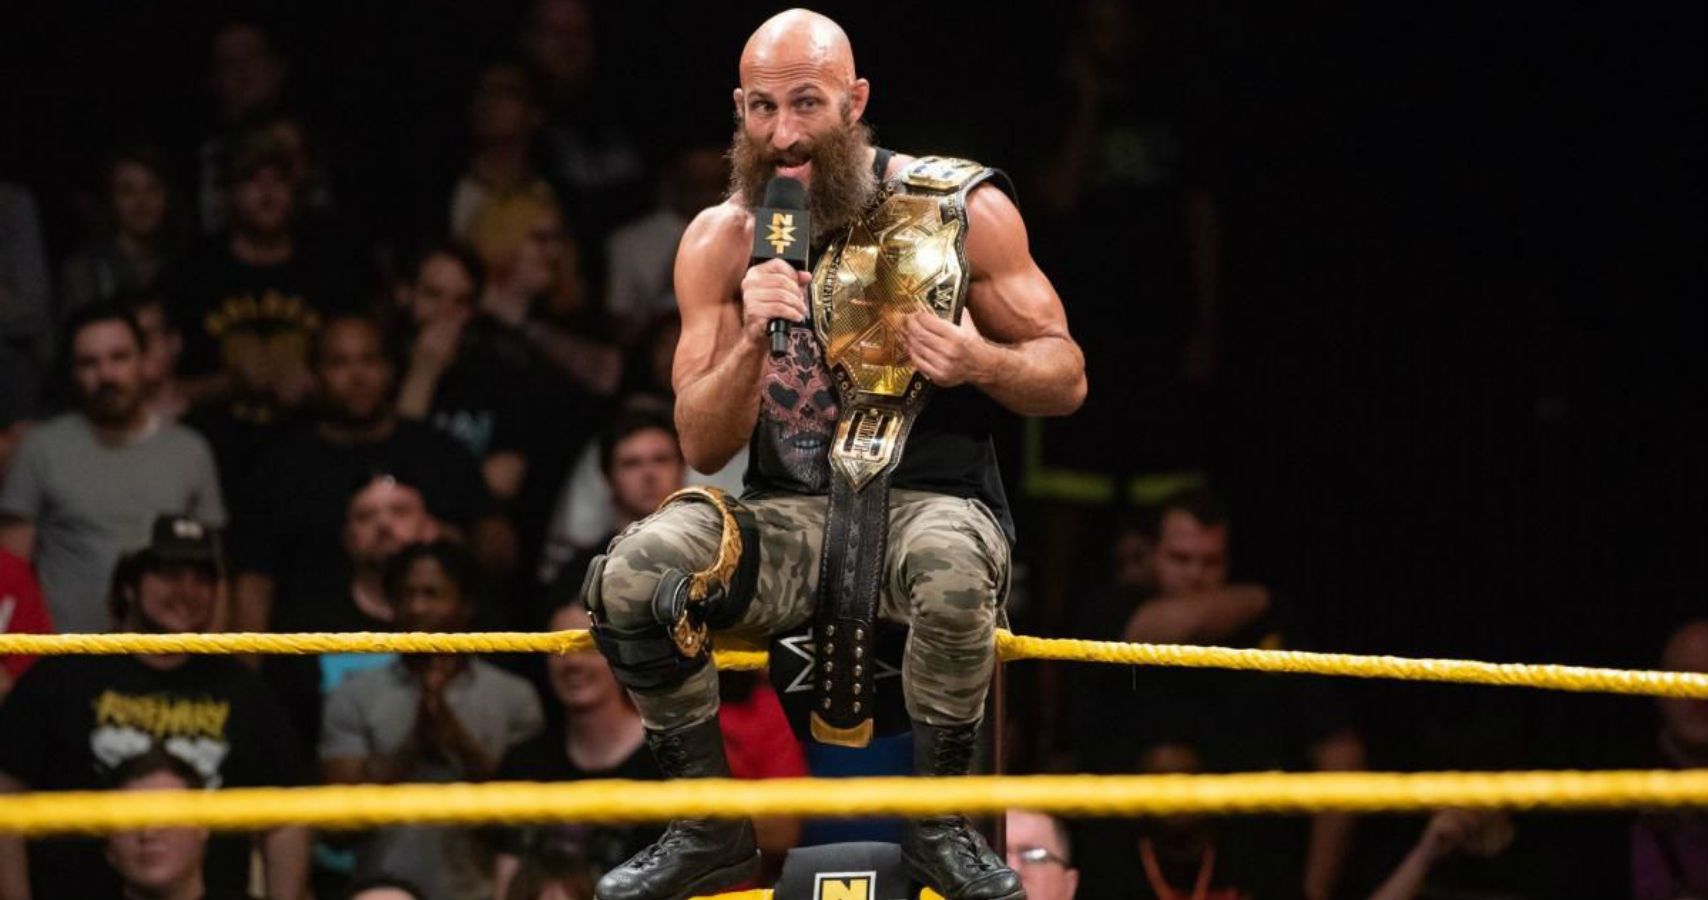 NXT, Tomasso Ciampa, NXT Champion, Indy Wrestling, WWE